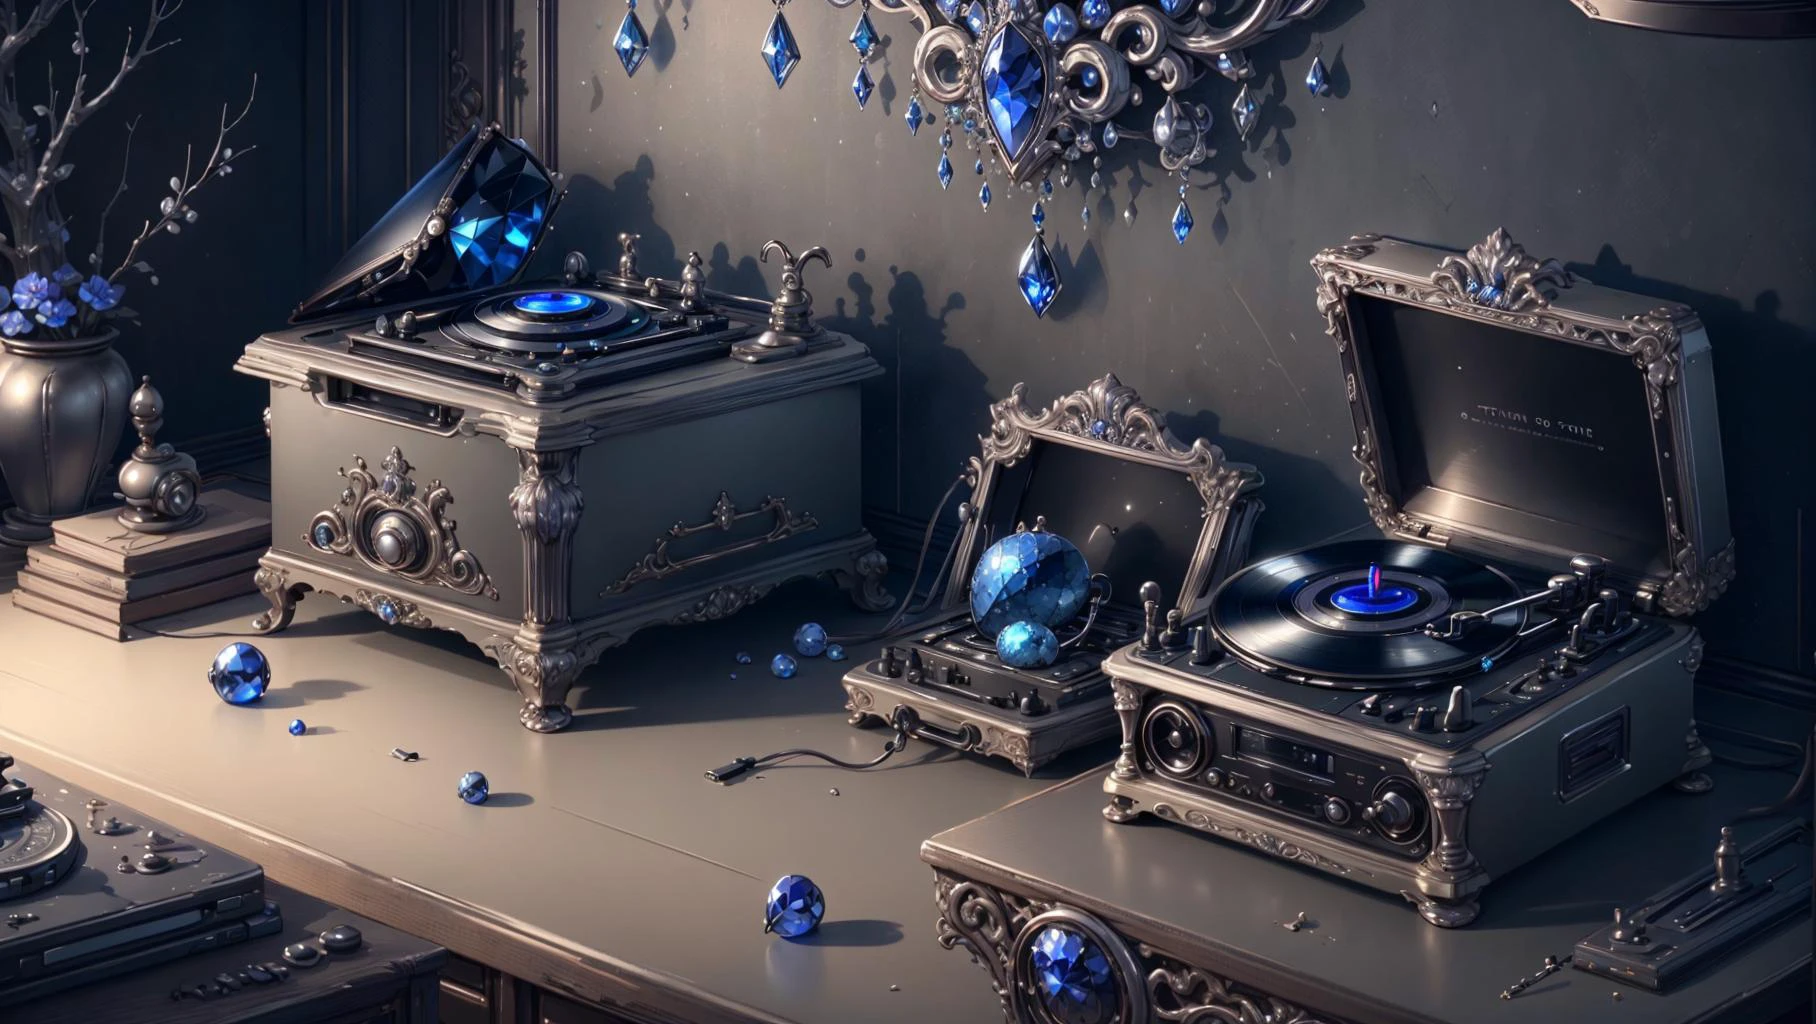 SilverSapphireAI, record player, detailed, intricate, cluttered environment